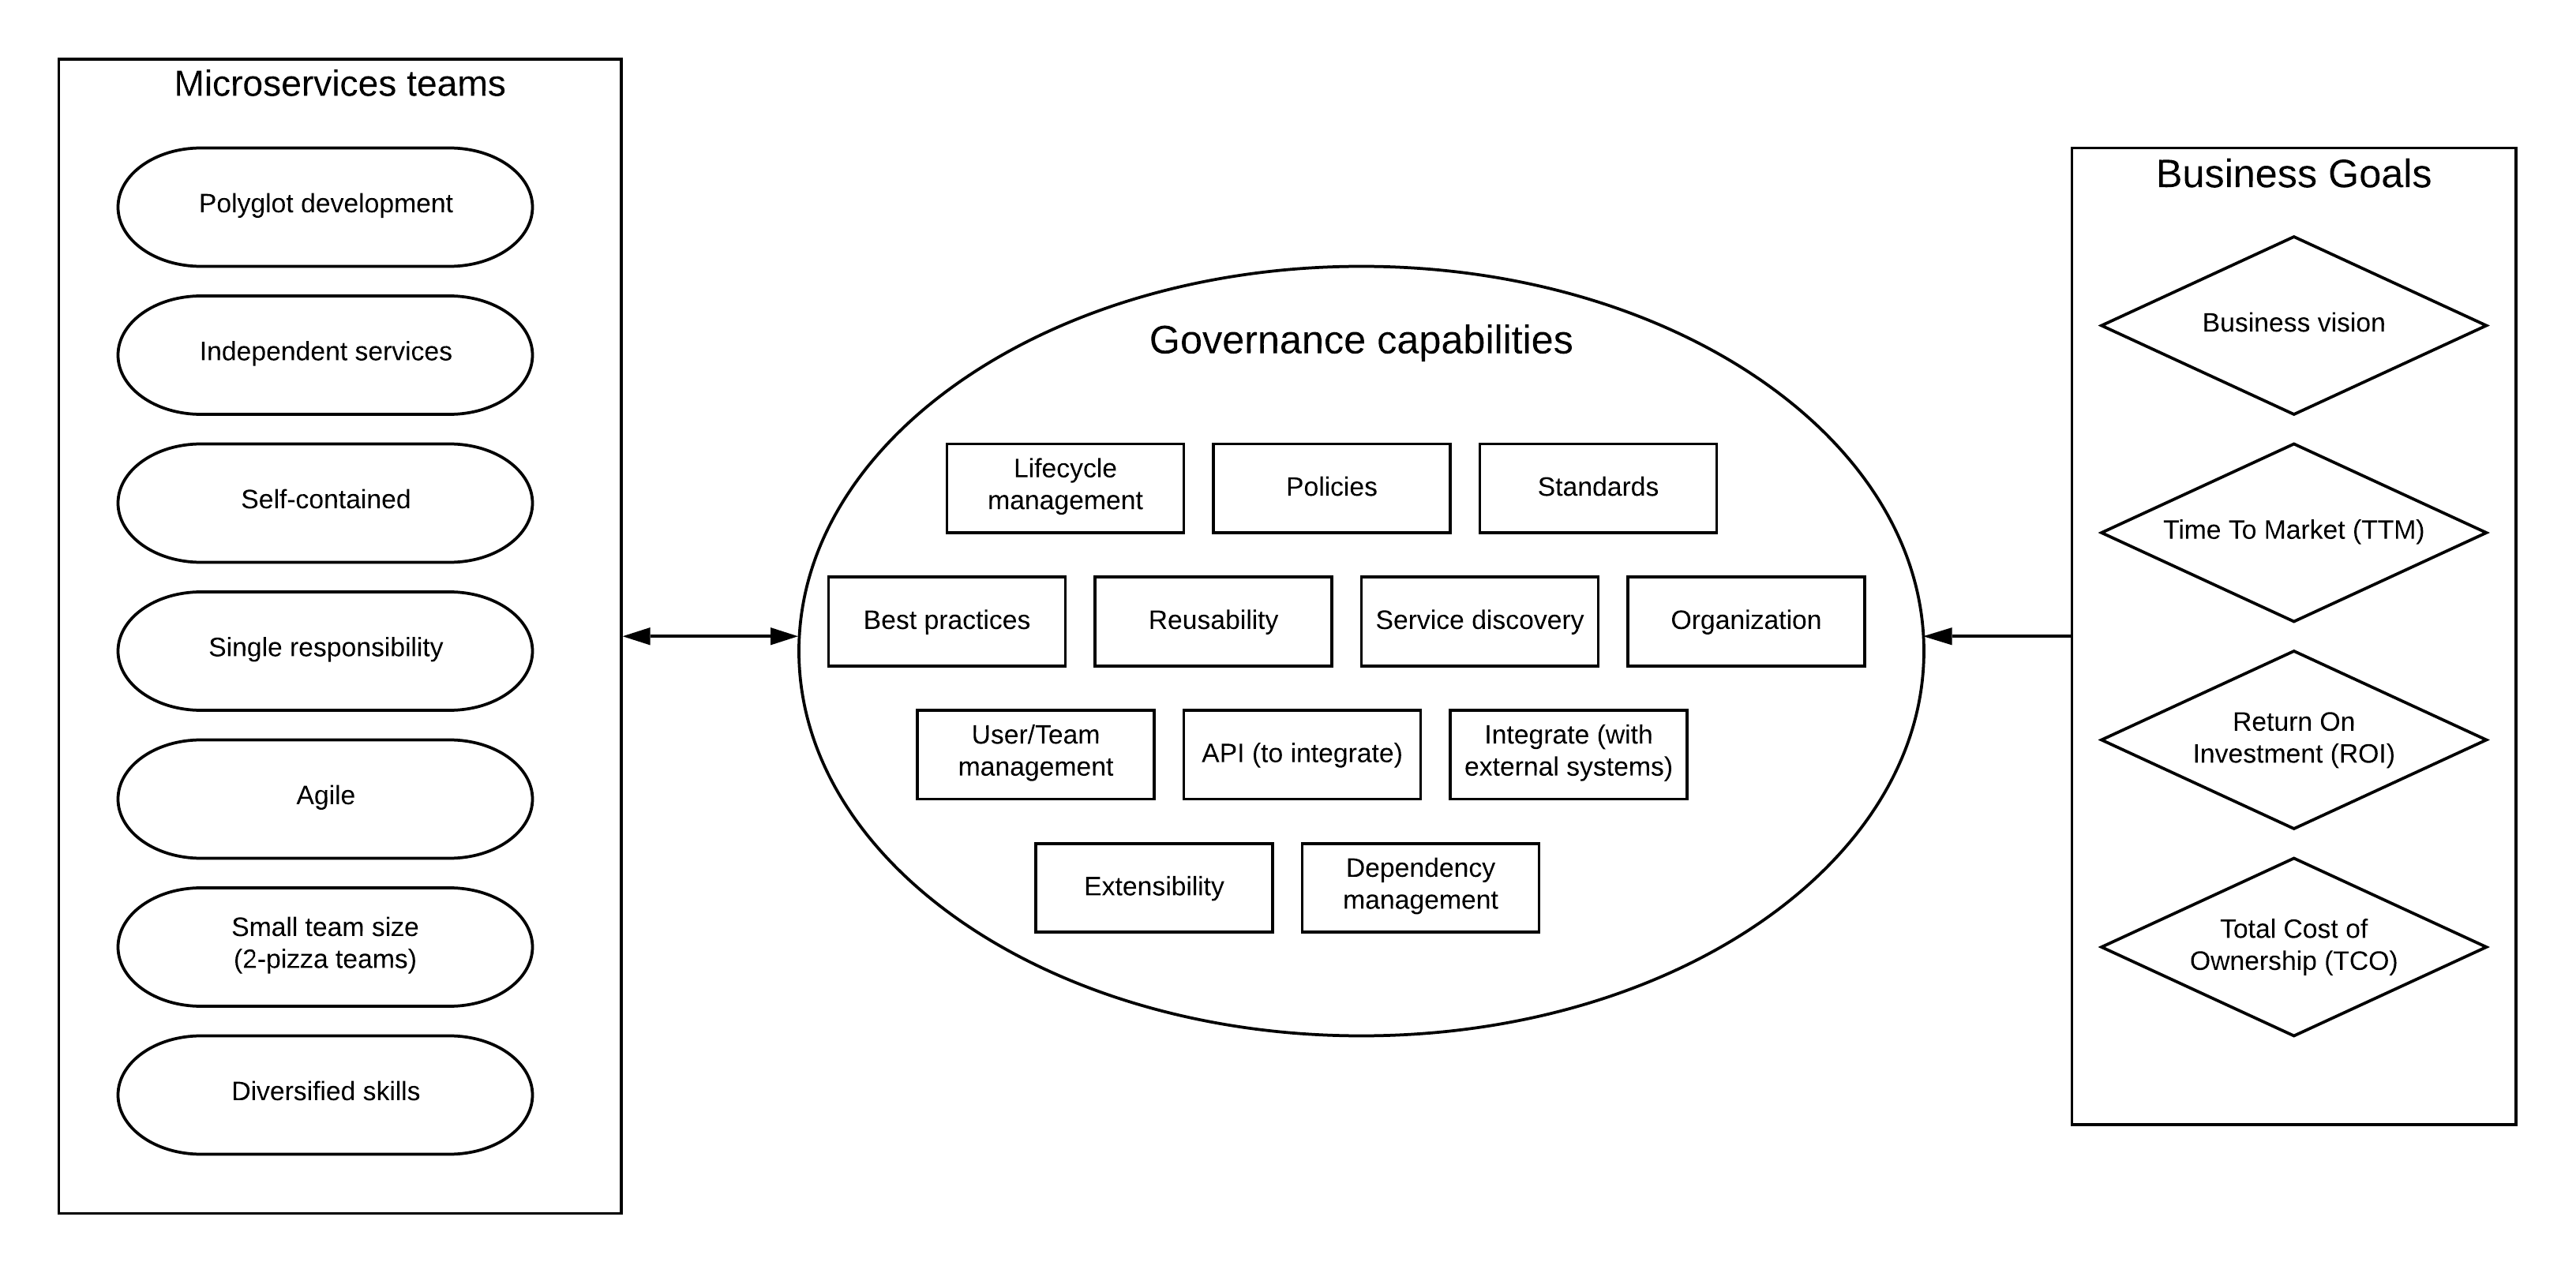 microservice, governance and business goals